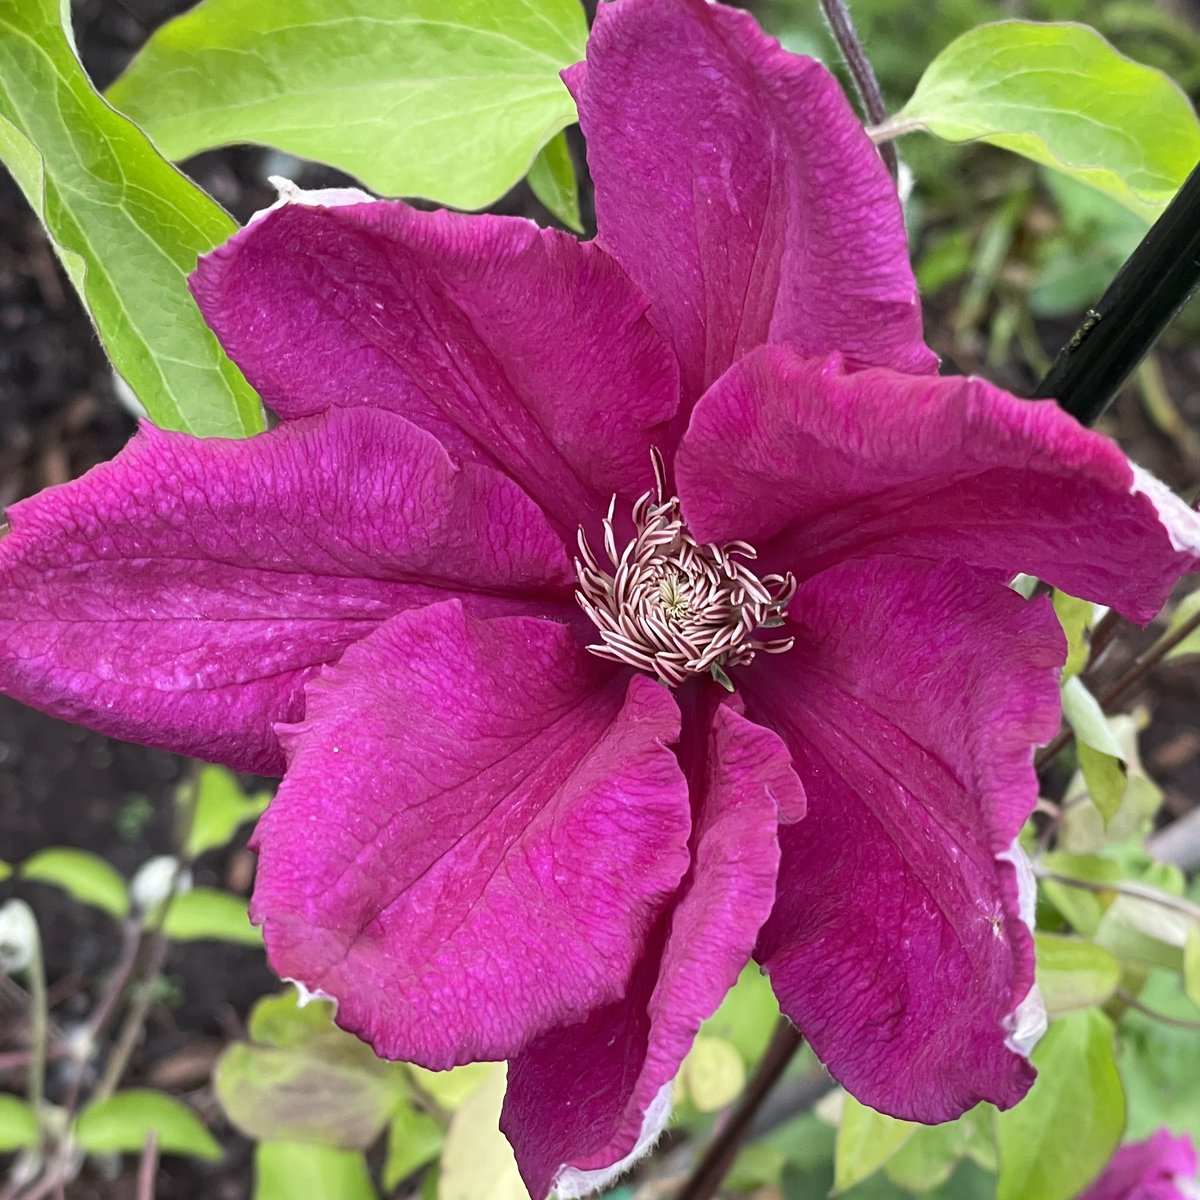 Meanwhile, in my Devon garden the clematis are getting into their stride . A bit late for #magendamonday but just in time for #clematisthursday #flowers #garden